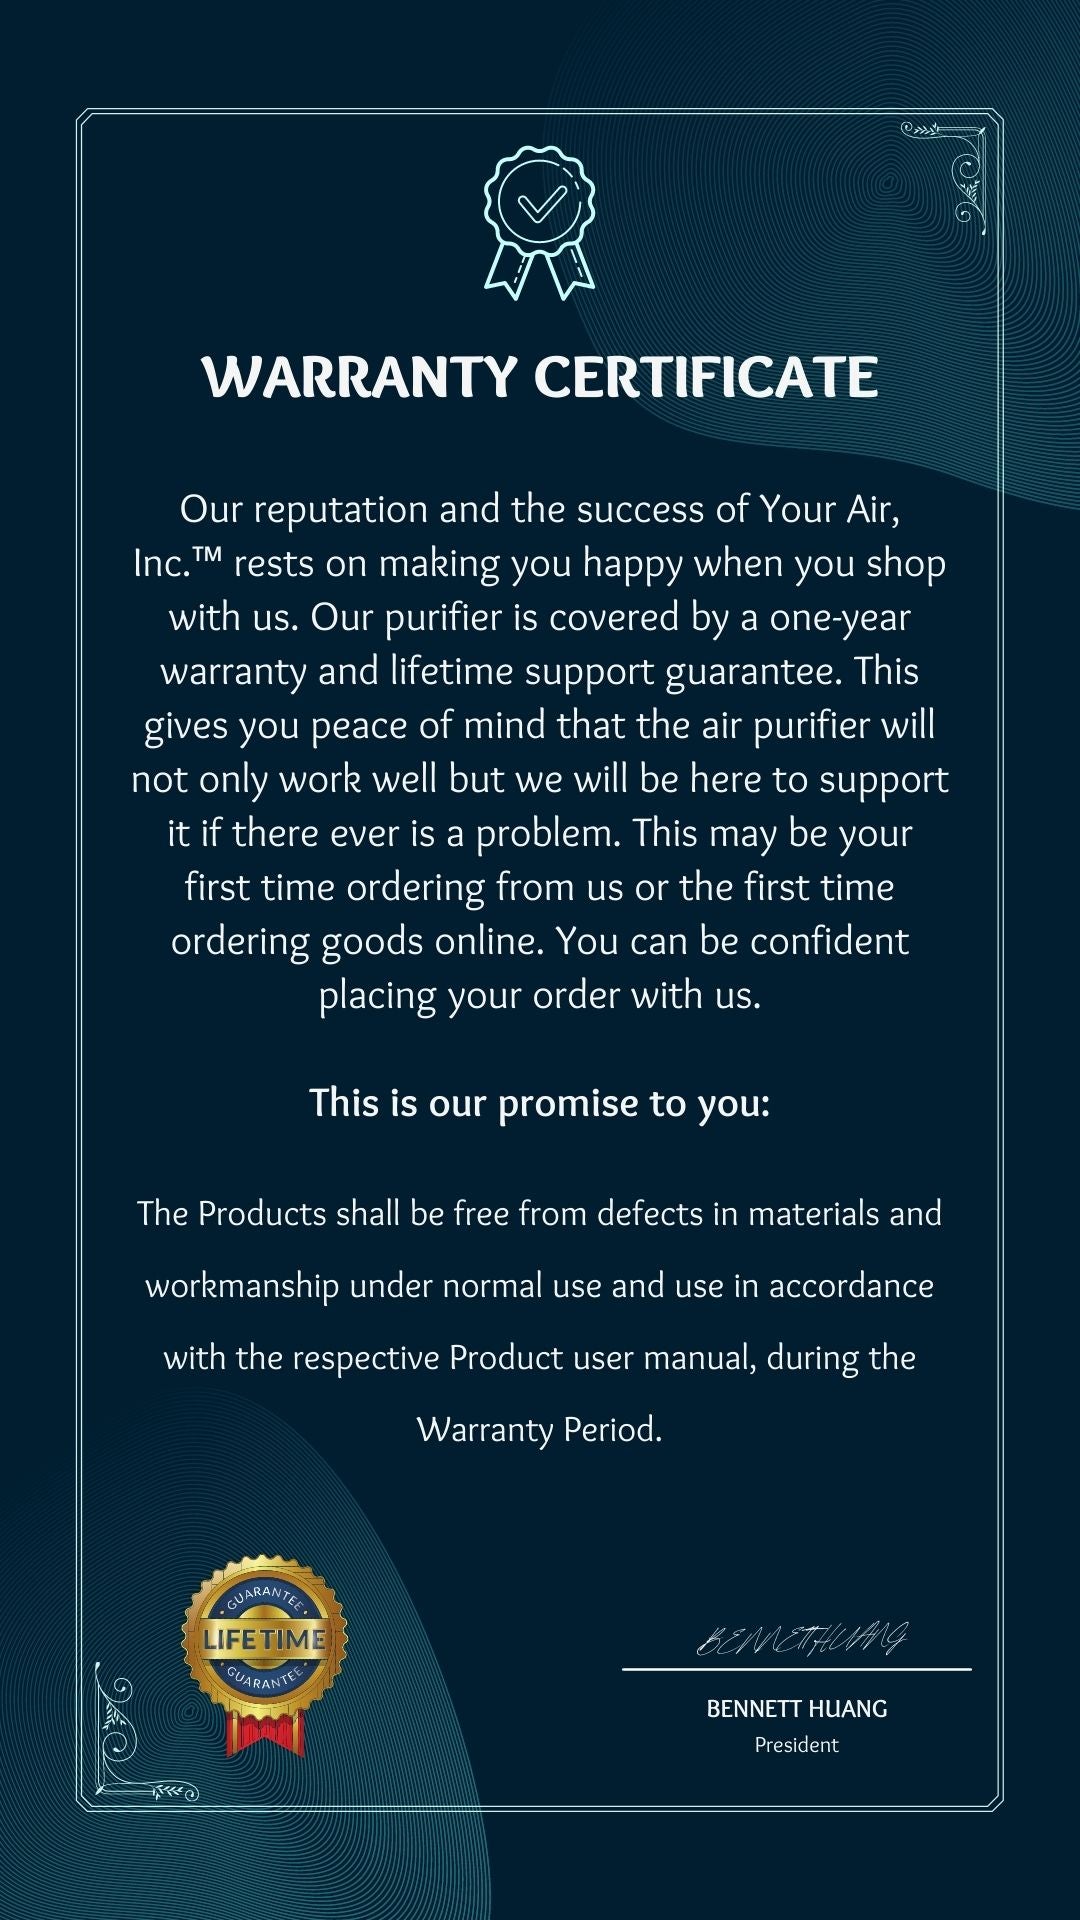 Your Air, Inc.™ One-Year Limited Warranty Certificate for Air Purifier